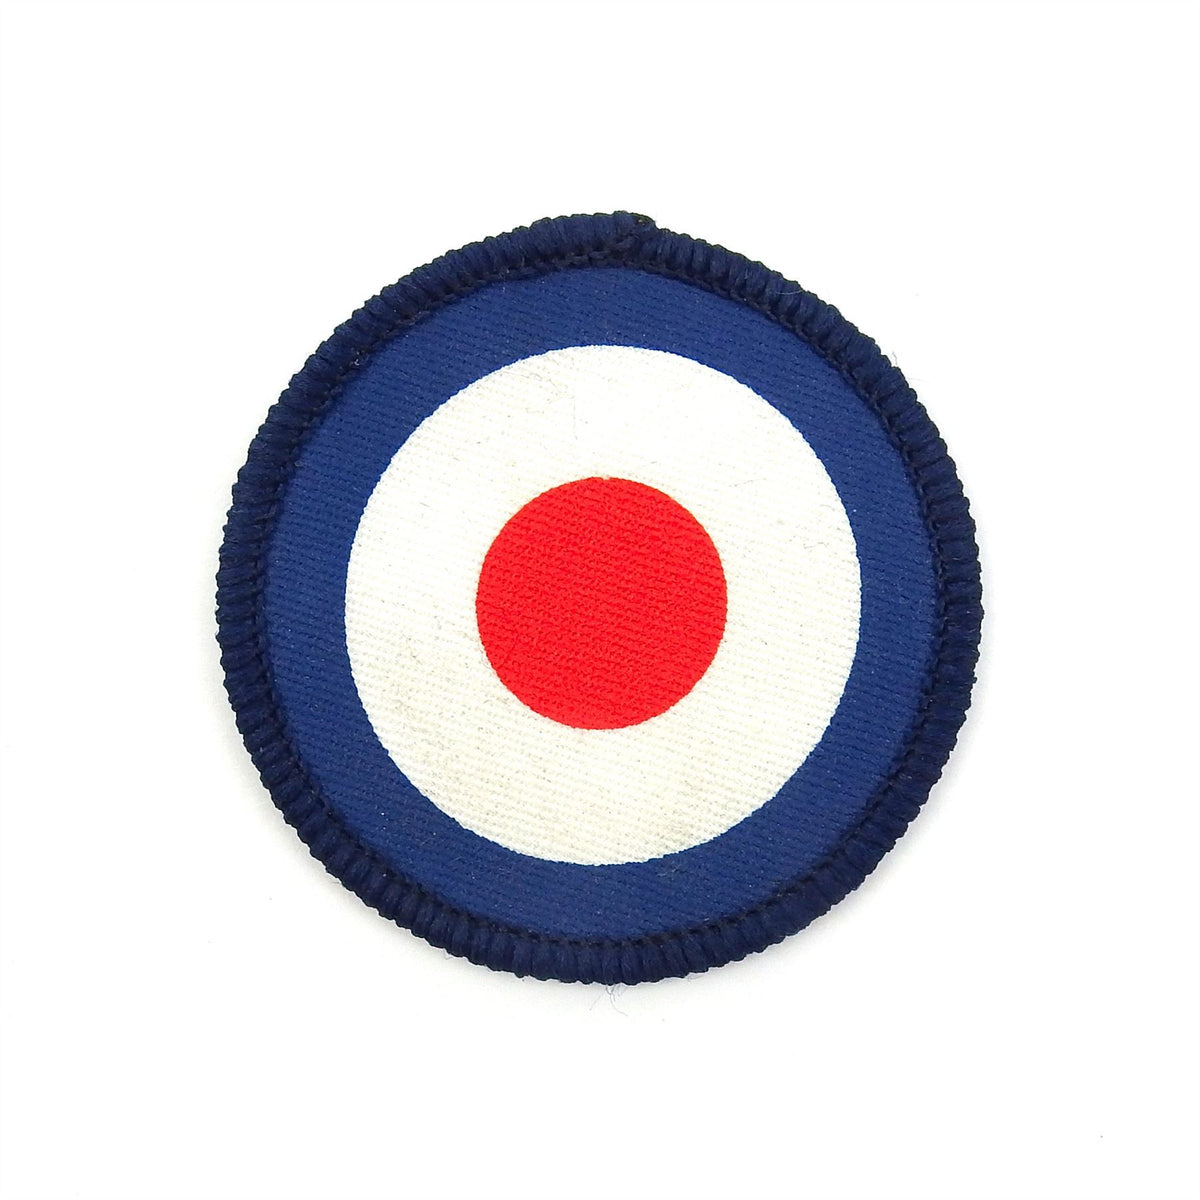 Patch - Target